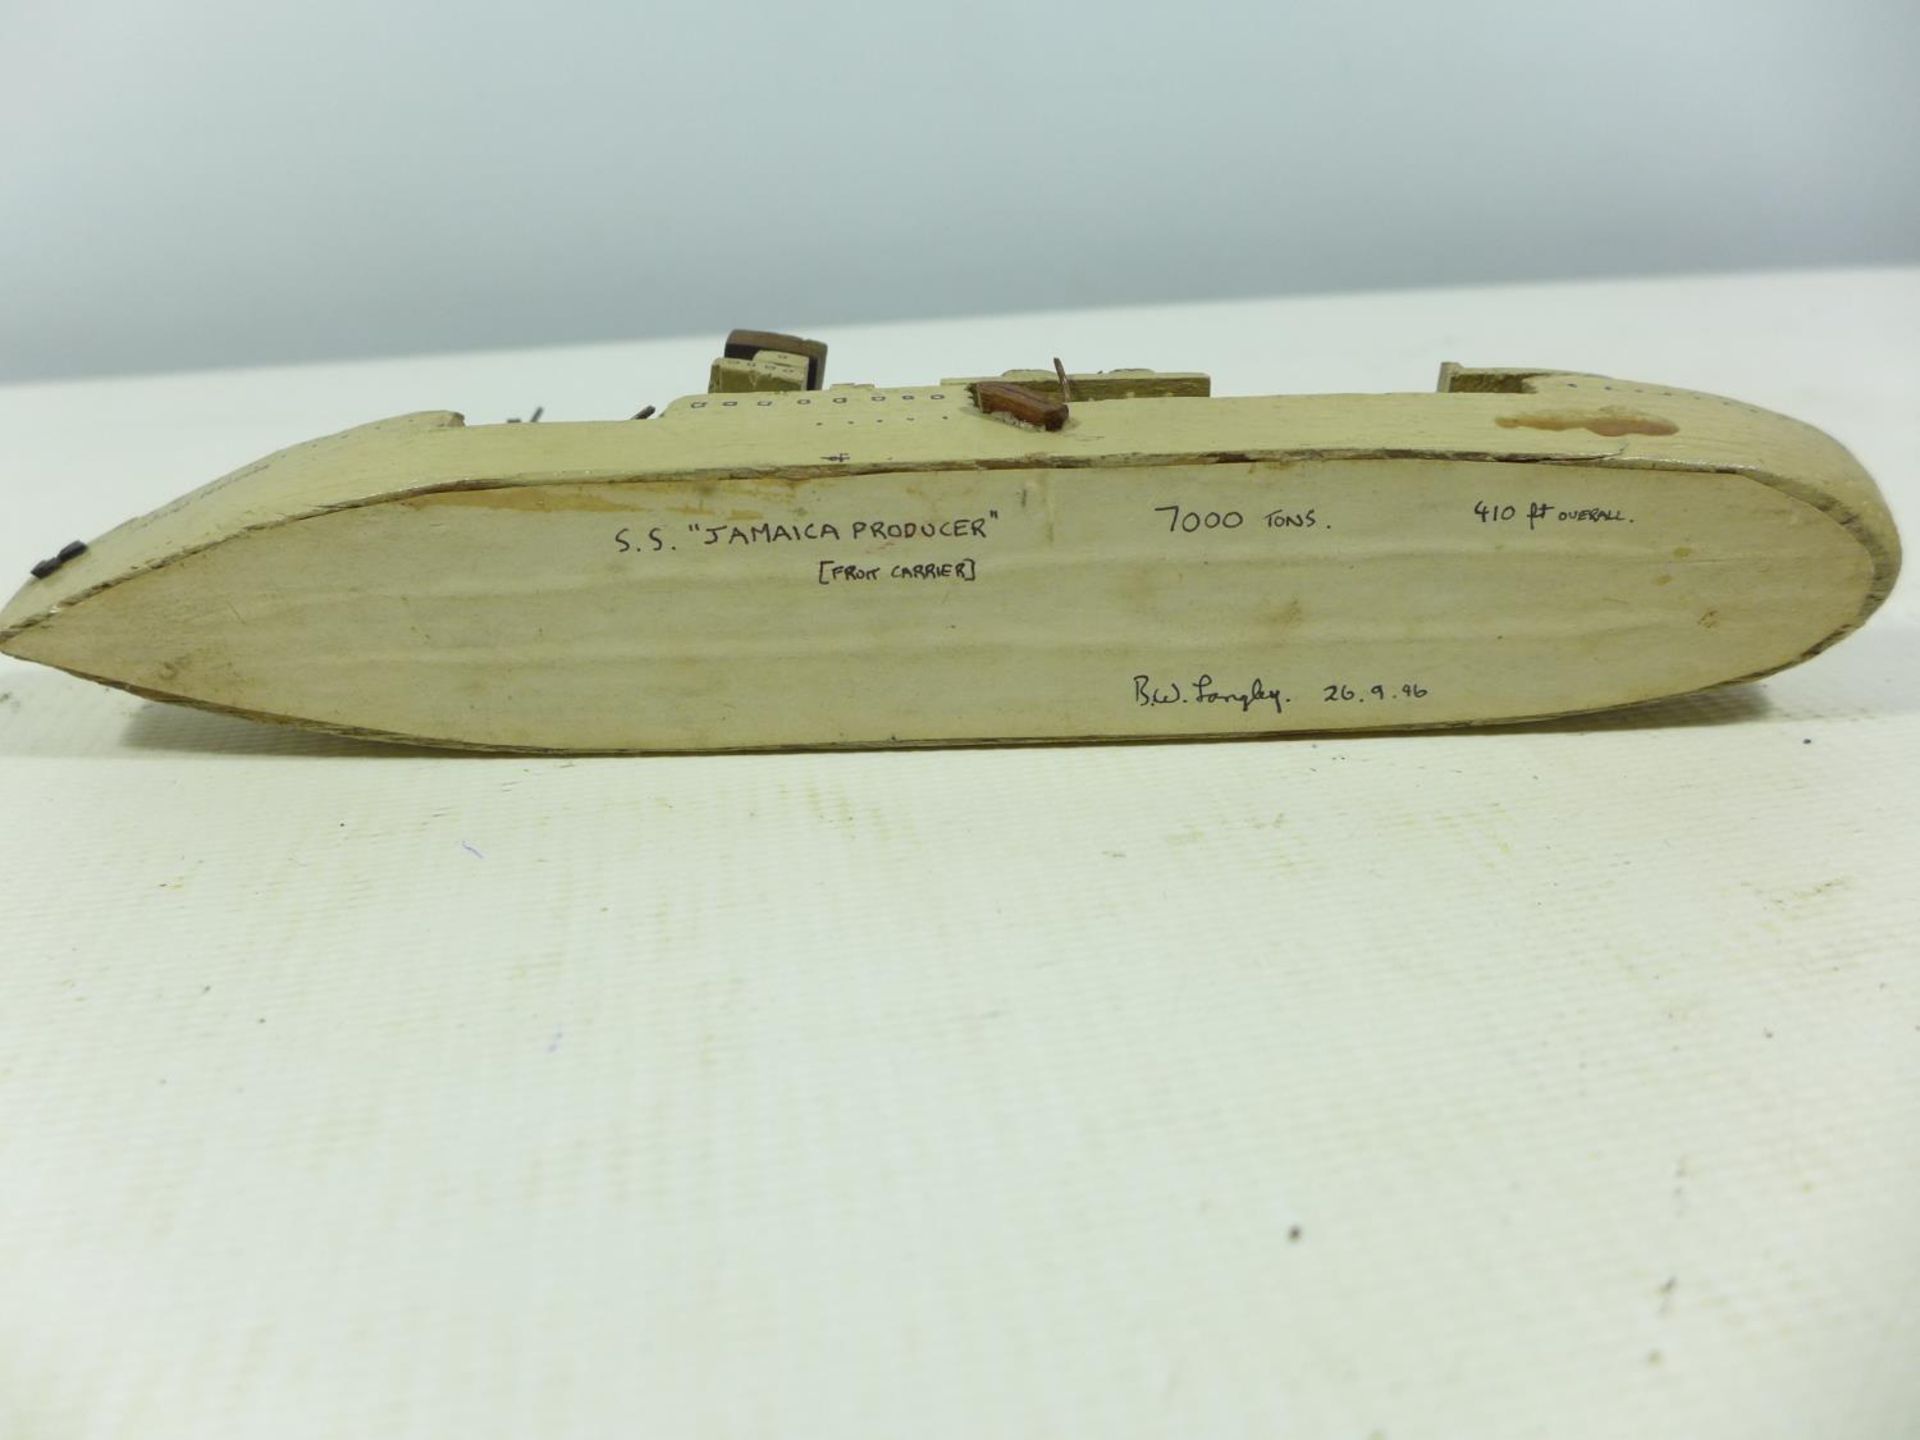 A MODEL OF THE SHIP 'JAMAICA PRODUCER' DATED 1946, LENGTH 21CM, TEAK BARREL FROM HMS AJAX, IRON BALL - Image 4 of 6